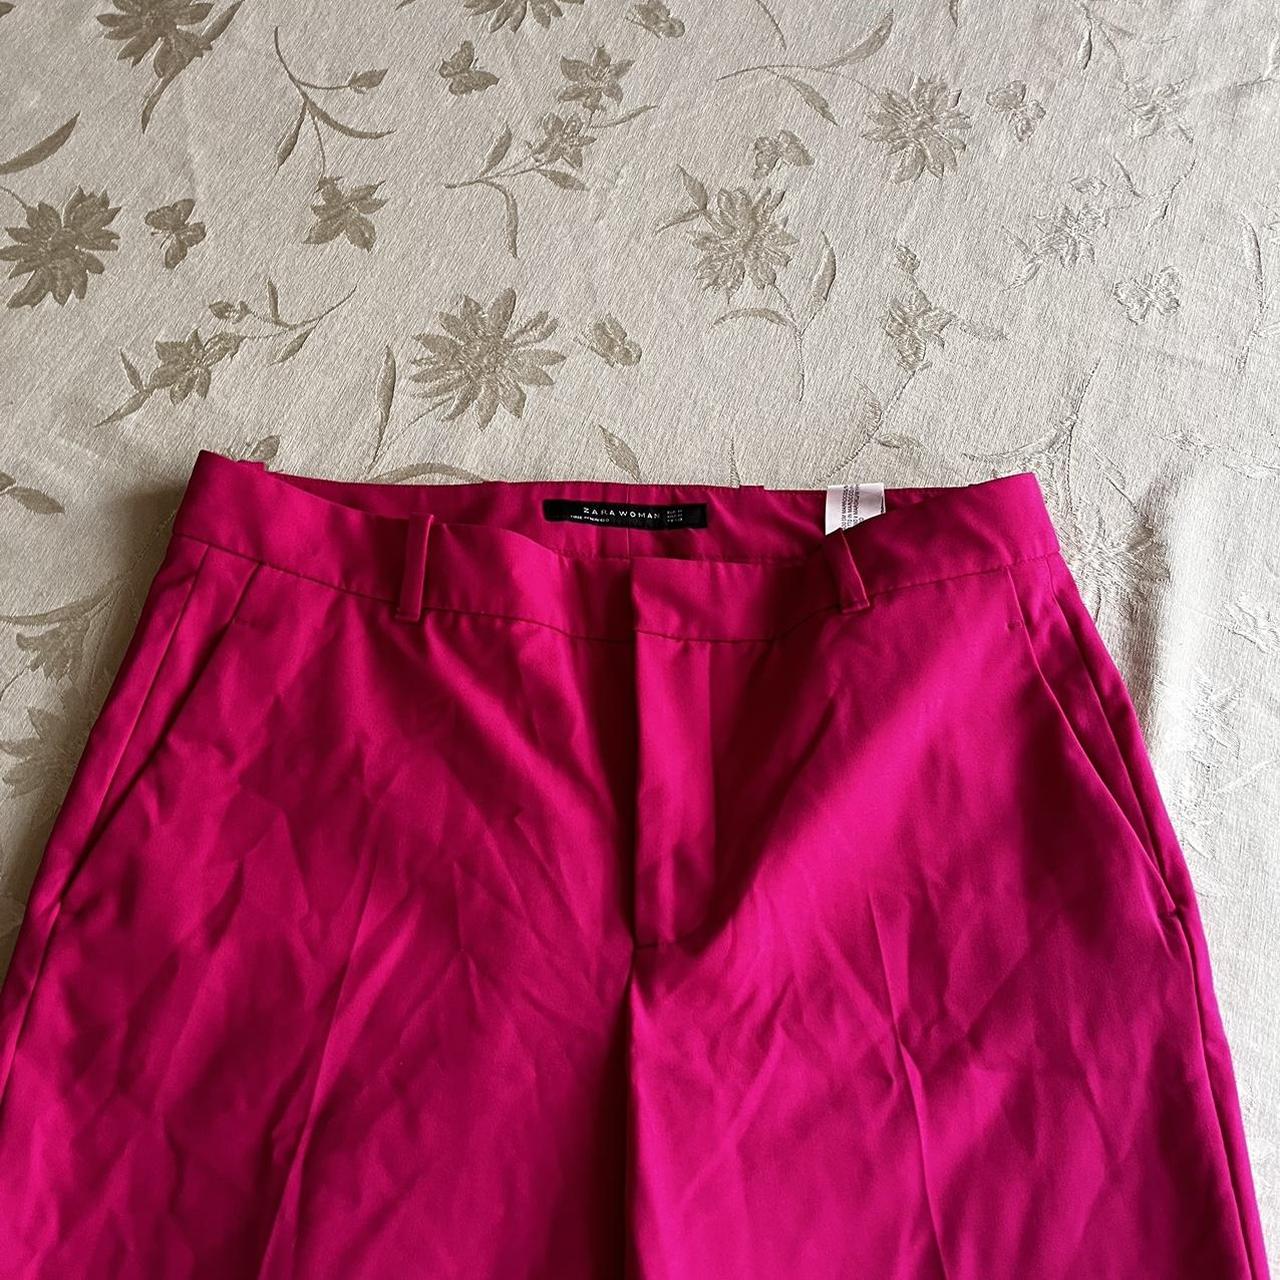 ZARA pink pants! bought last year and never worn :) - Depop